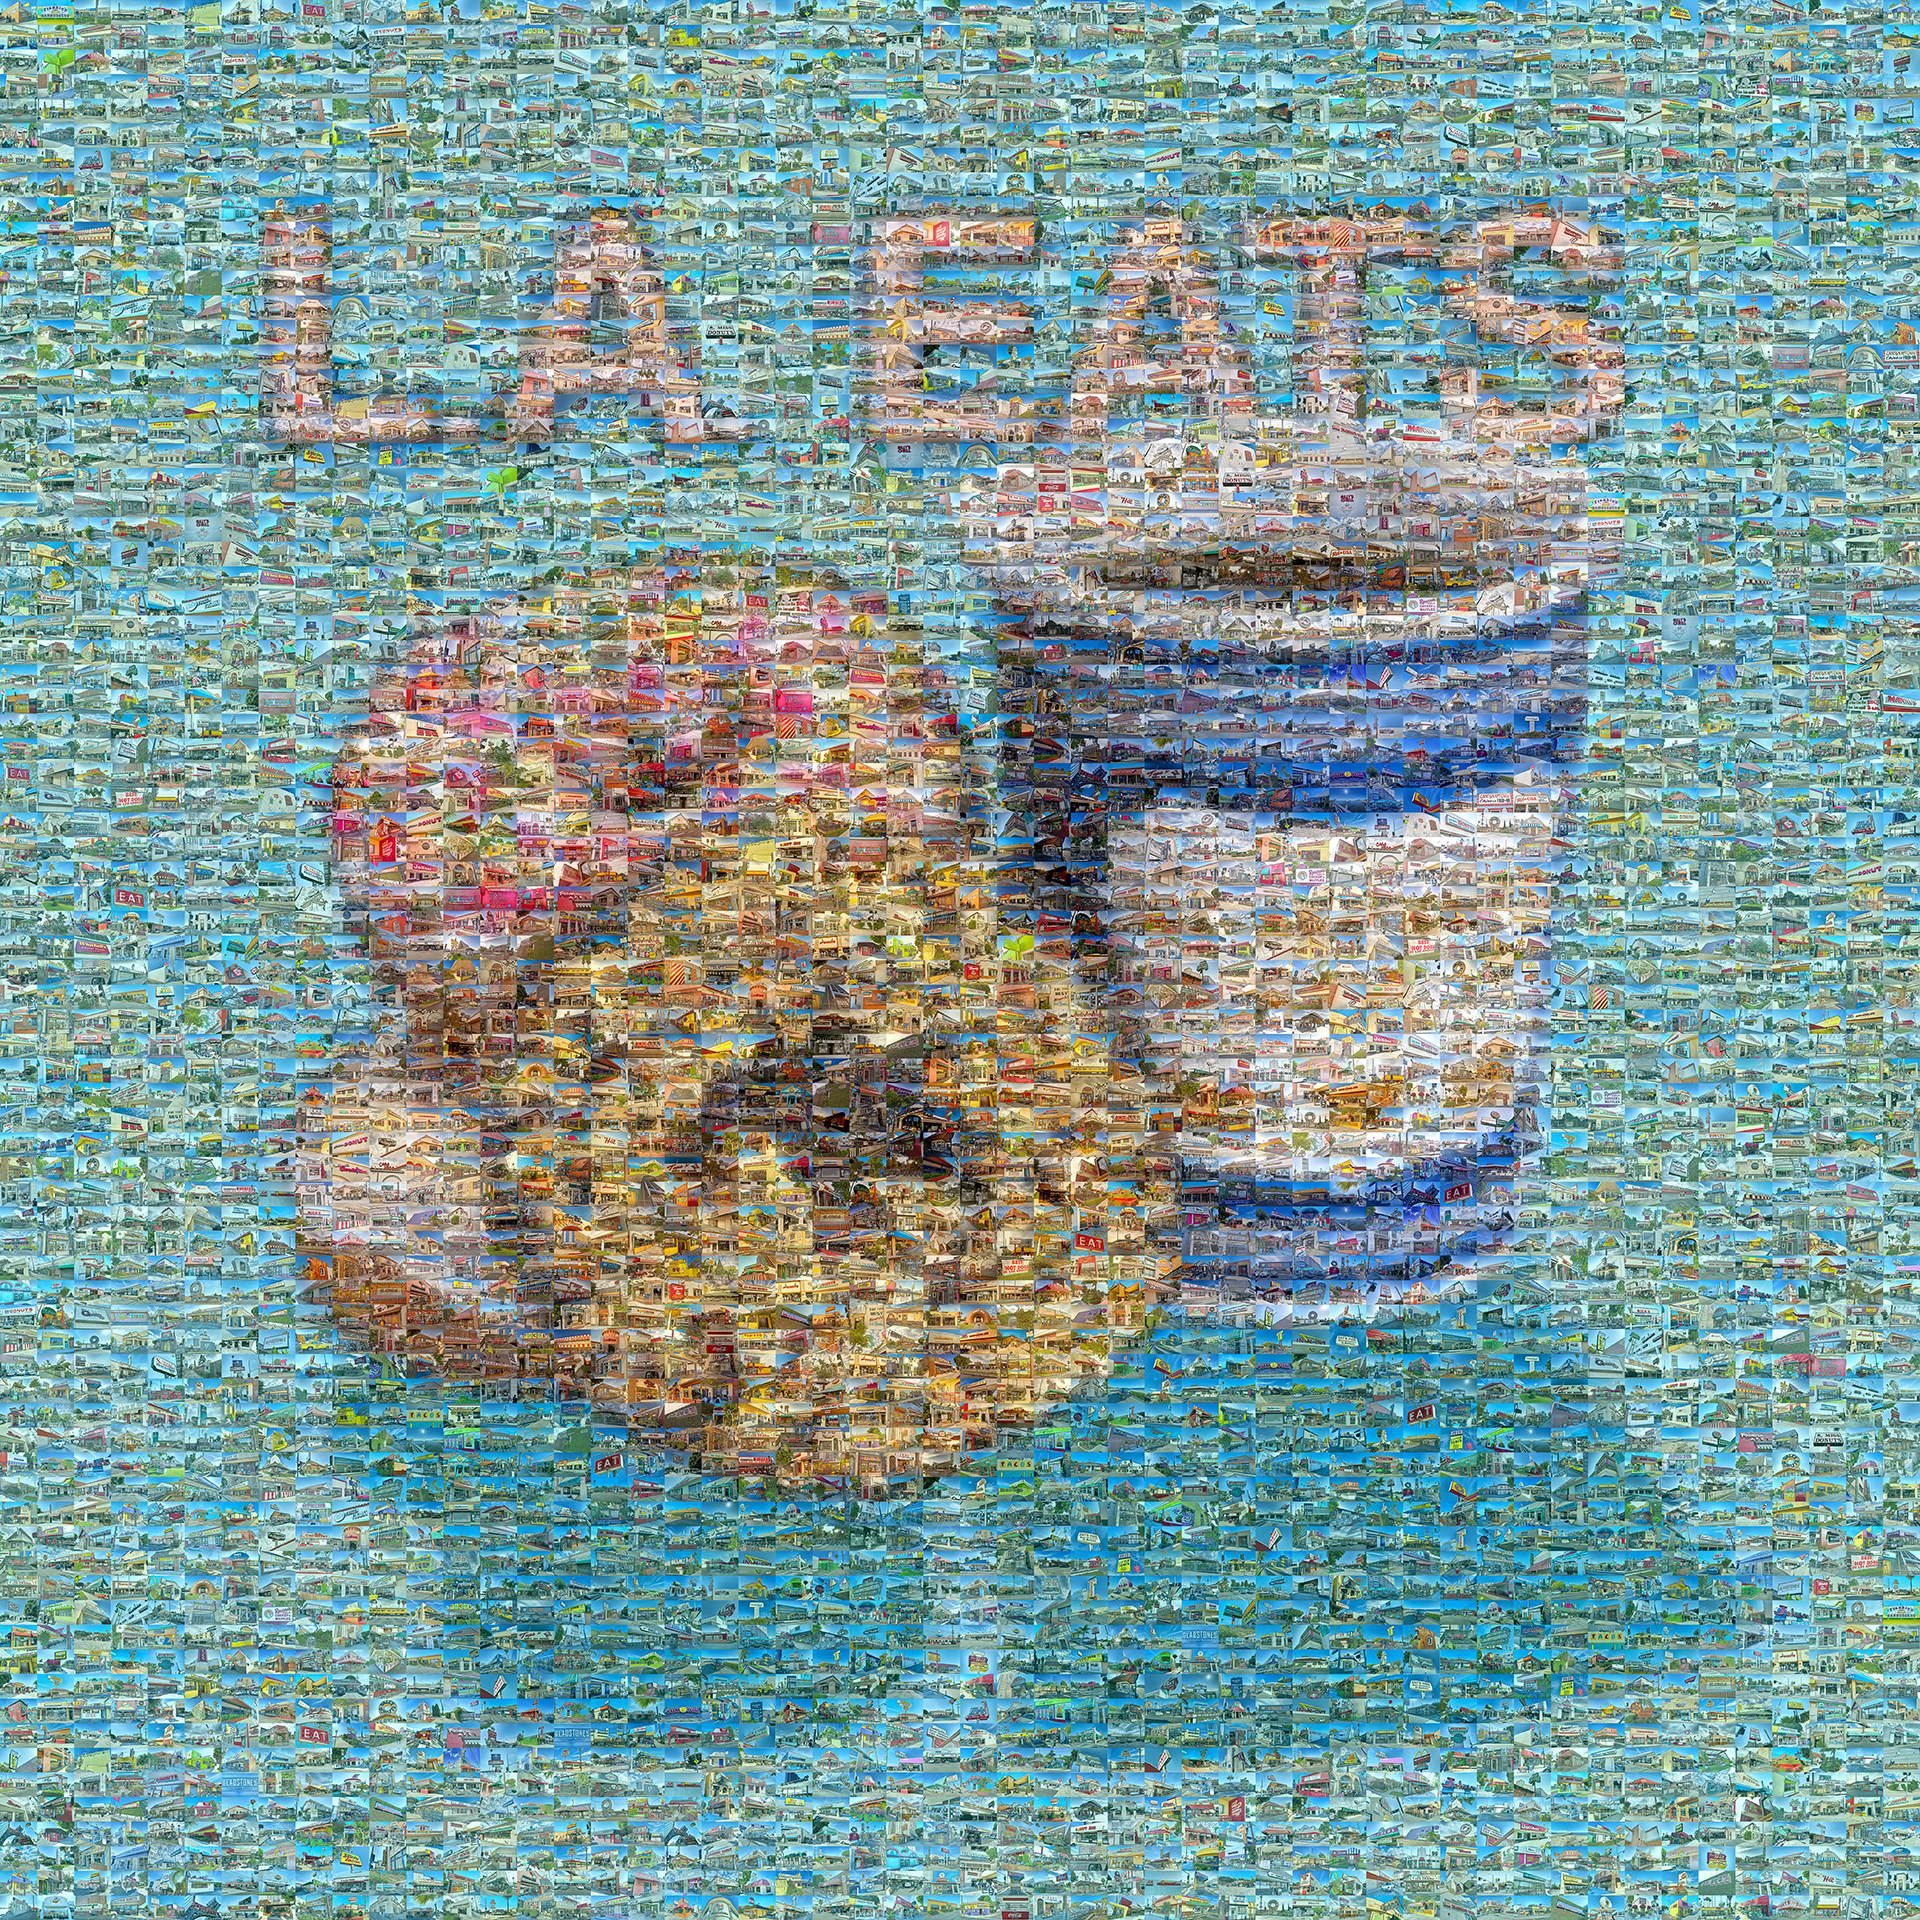 photo mosaic created using 1,163 photos of various doughnut shops and diners around L.A.